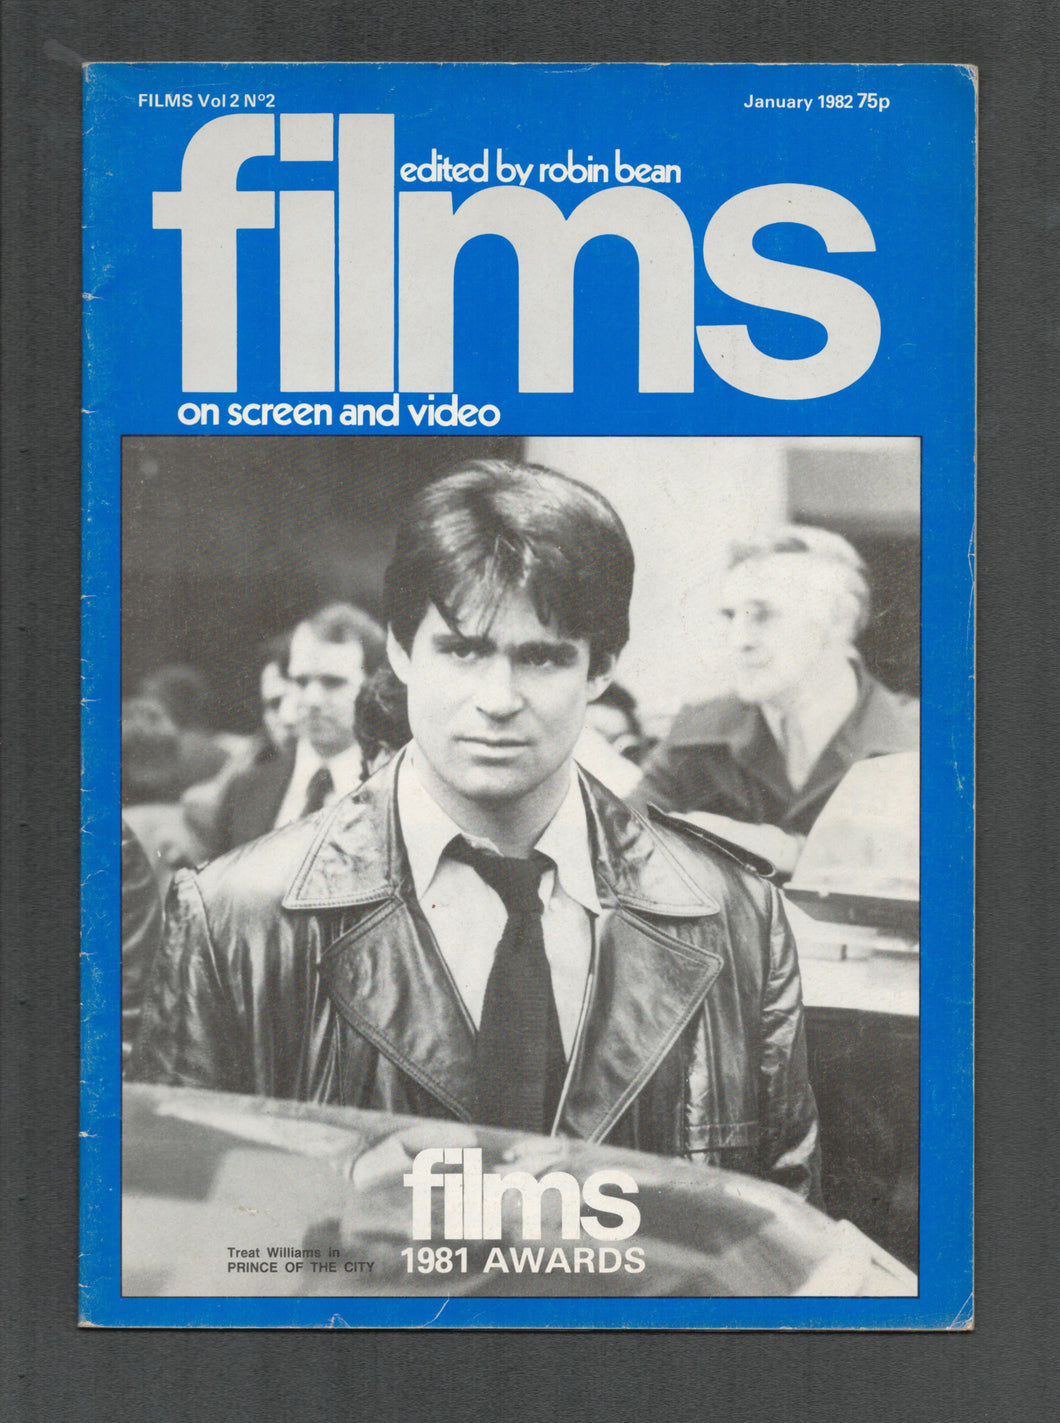 Films On Screen and Video Vol 2 No 2 Jan 1982